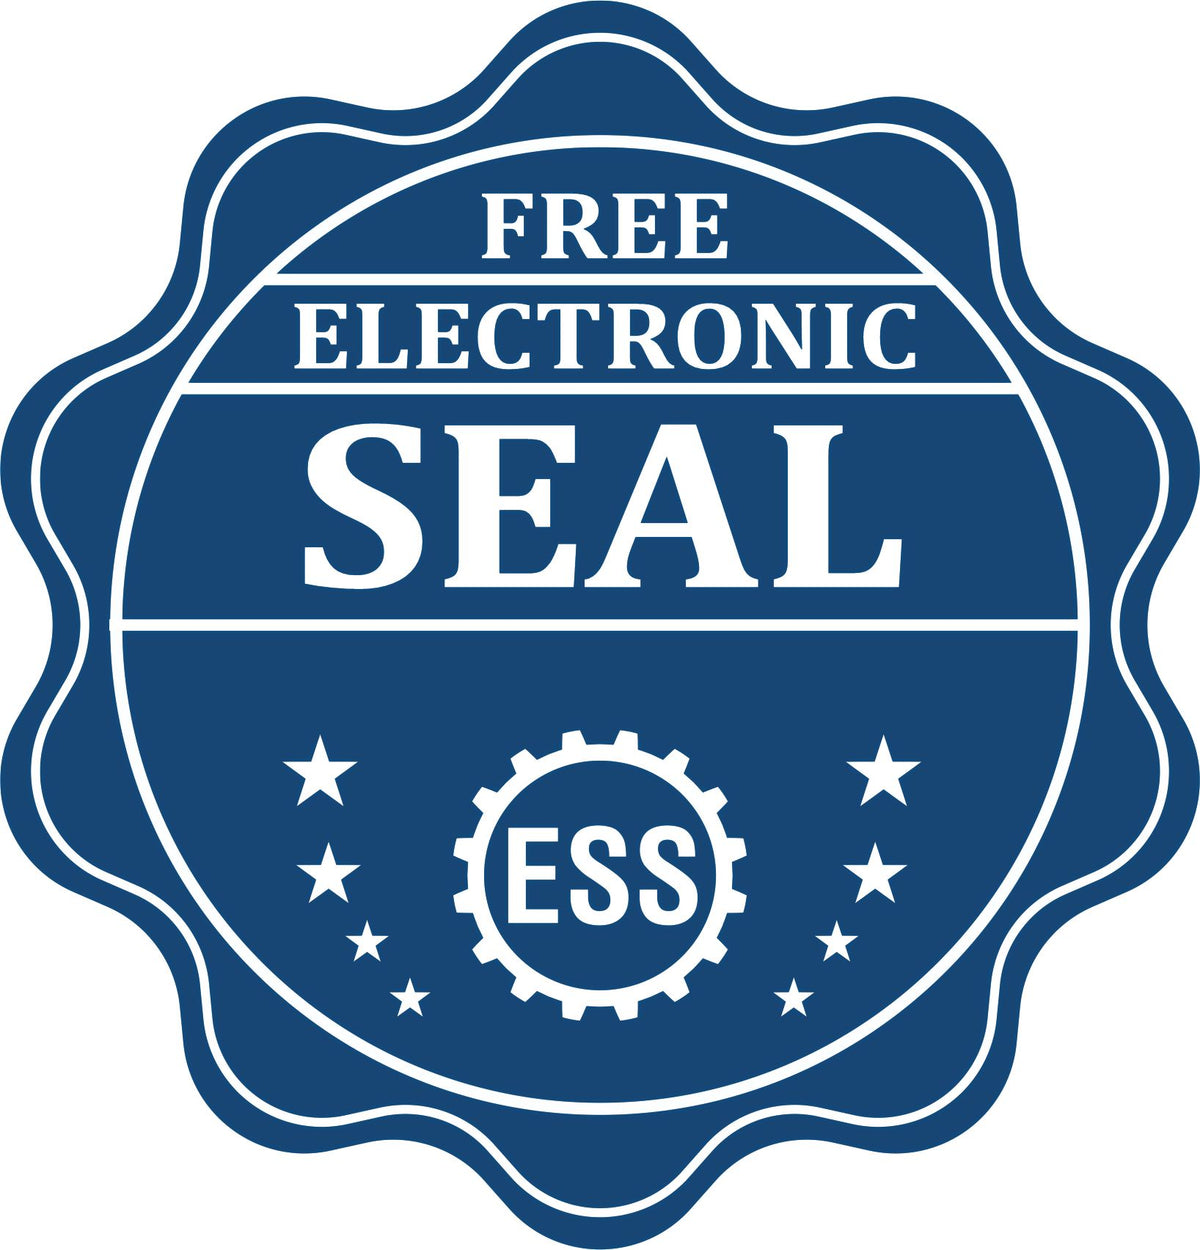 A badge showing a free electronic seal for the Heavy Duty Cast Iron Hawaii Engineer Seal Embosser with stars and the ESS gear on the emblem.